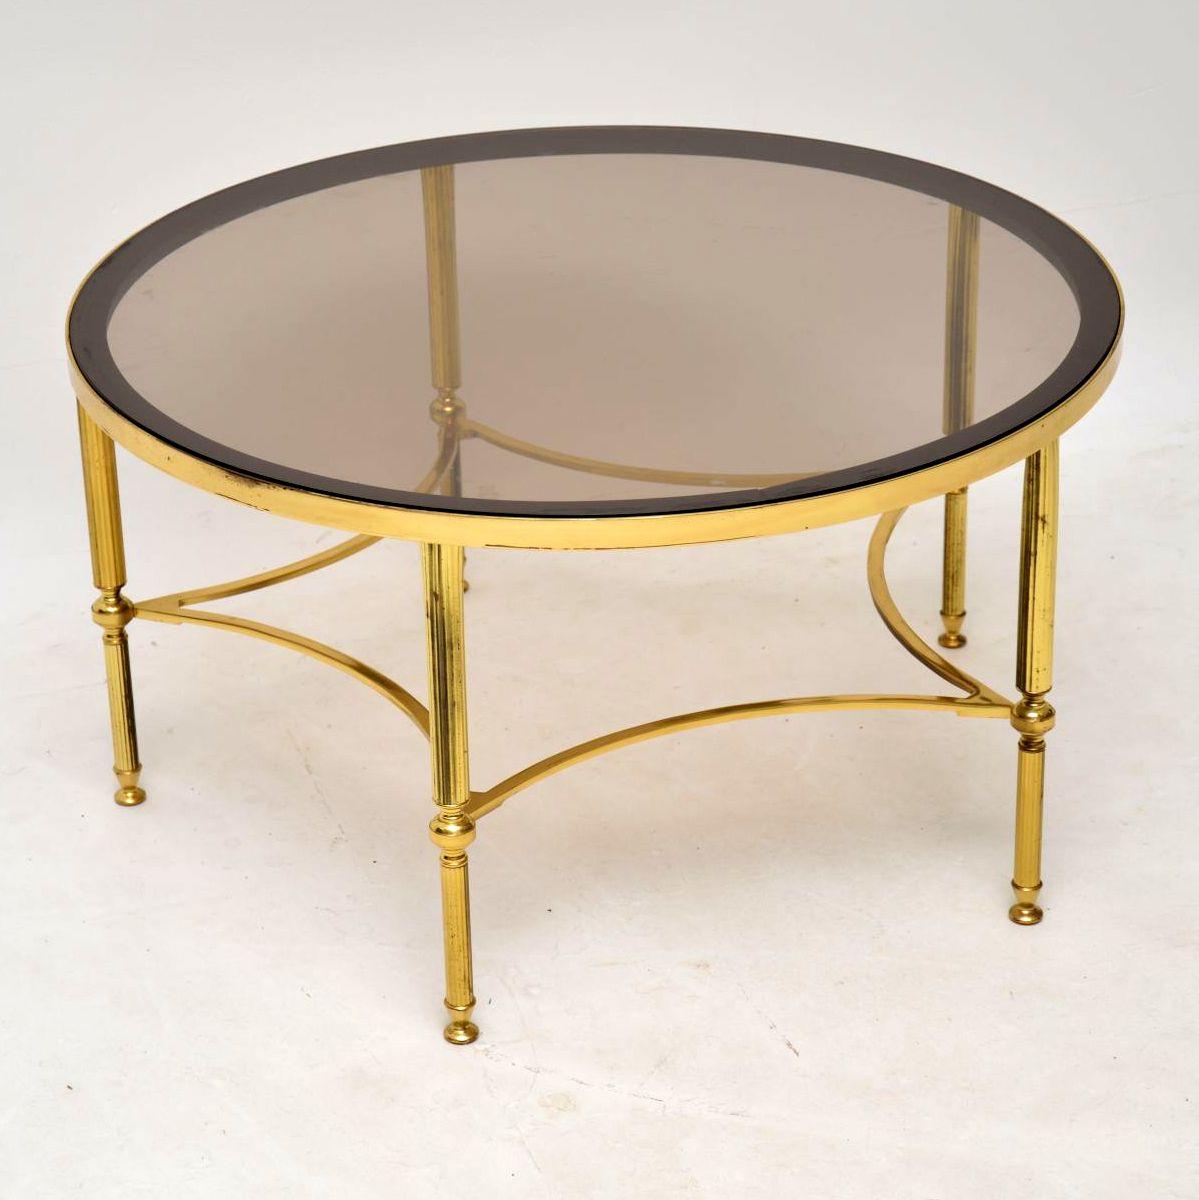 A beautiful and stylish vintage coffee table in brass and glass, this was made in France, circa 1960s-1970s. It’s very well made and in great condition for its age, with only some extremely minor wear here and there.

Measures: Width – 77 cm, 30